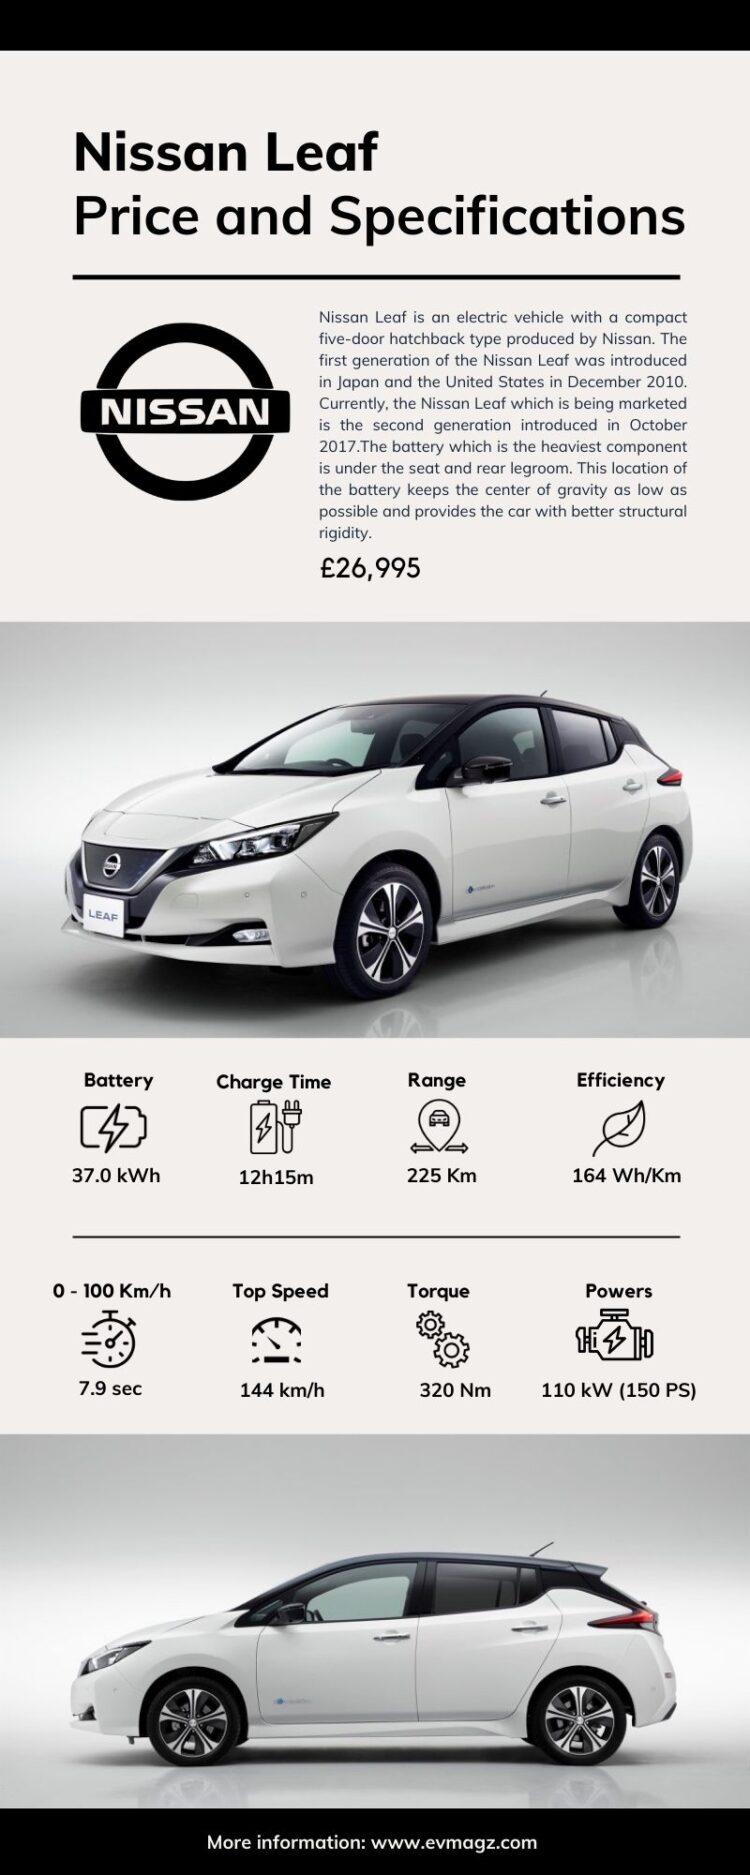 Nissan Leaf Price and Specifications Infographic